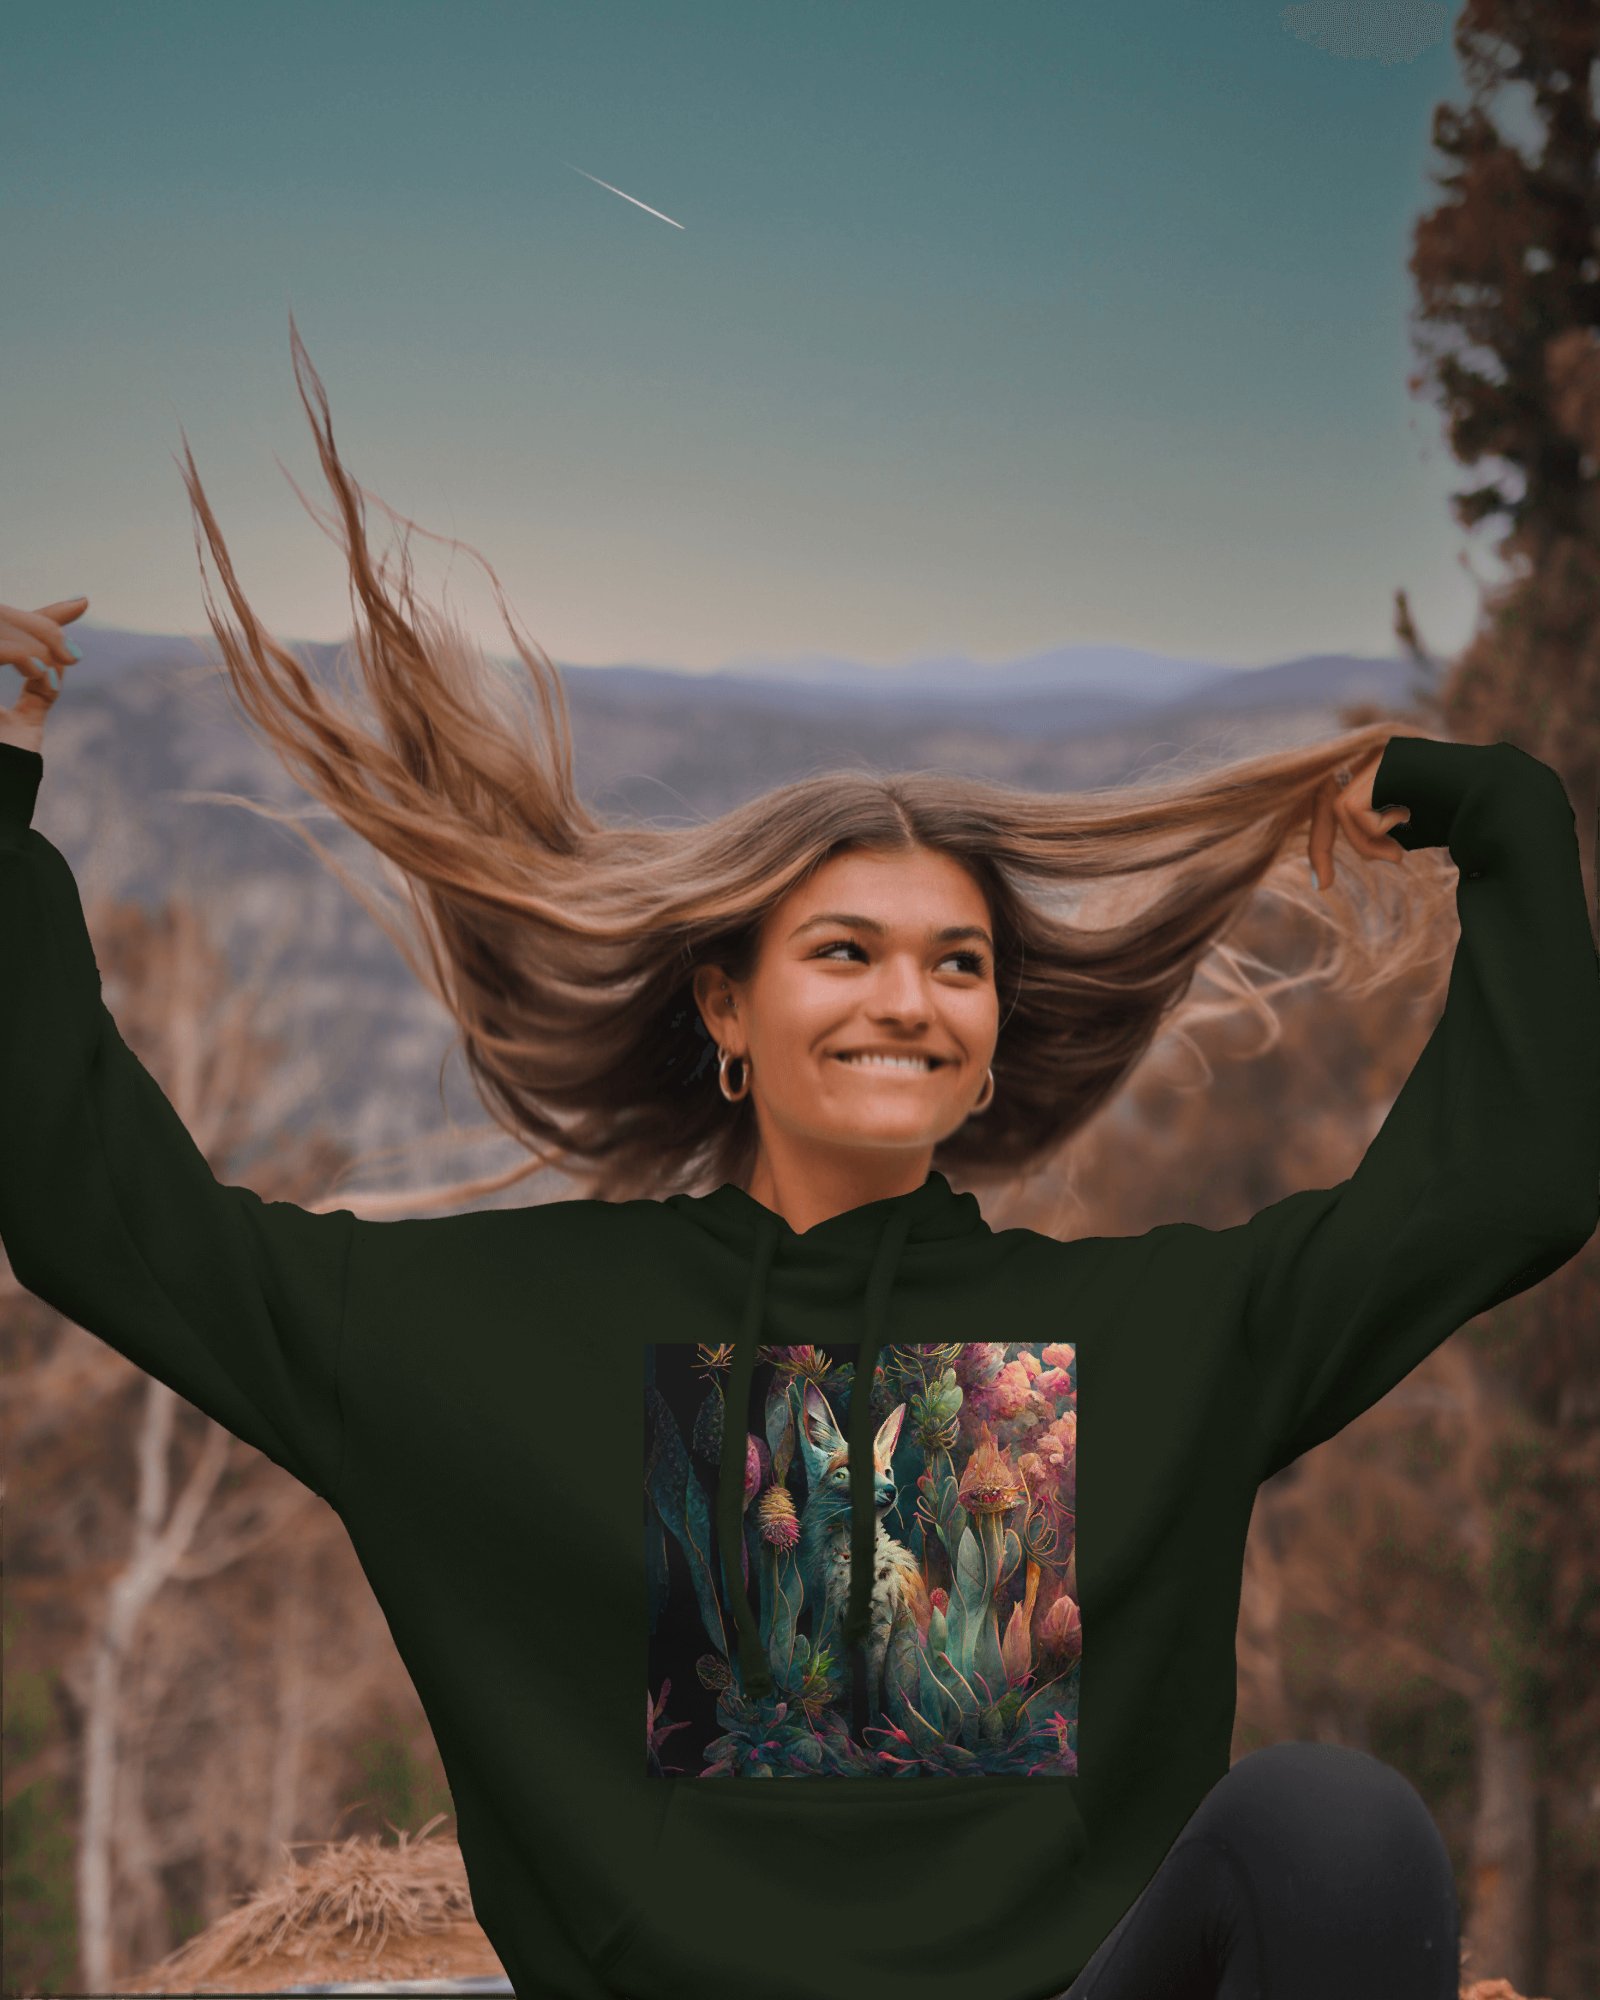 Experience nature's beauty in our stunning 'Nature's Beauty: Fox in a Meadow of Florals' pullover hoodie, available in Forest Green and Black. Seen here on a woman enjoying the outdoors, the intricate fox artwork and beautiful florals create an eye-catching design. Stay comfortable and stylish during your next outdoor adventure with this nature-inspired pullover hoodie